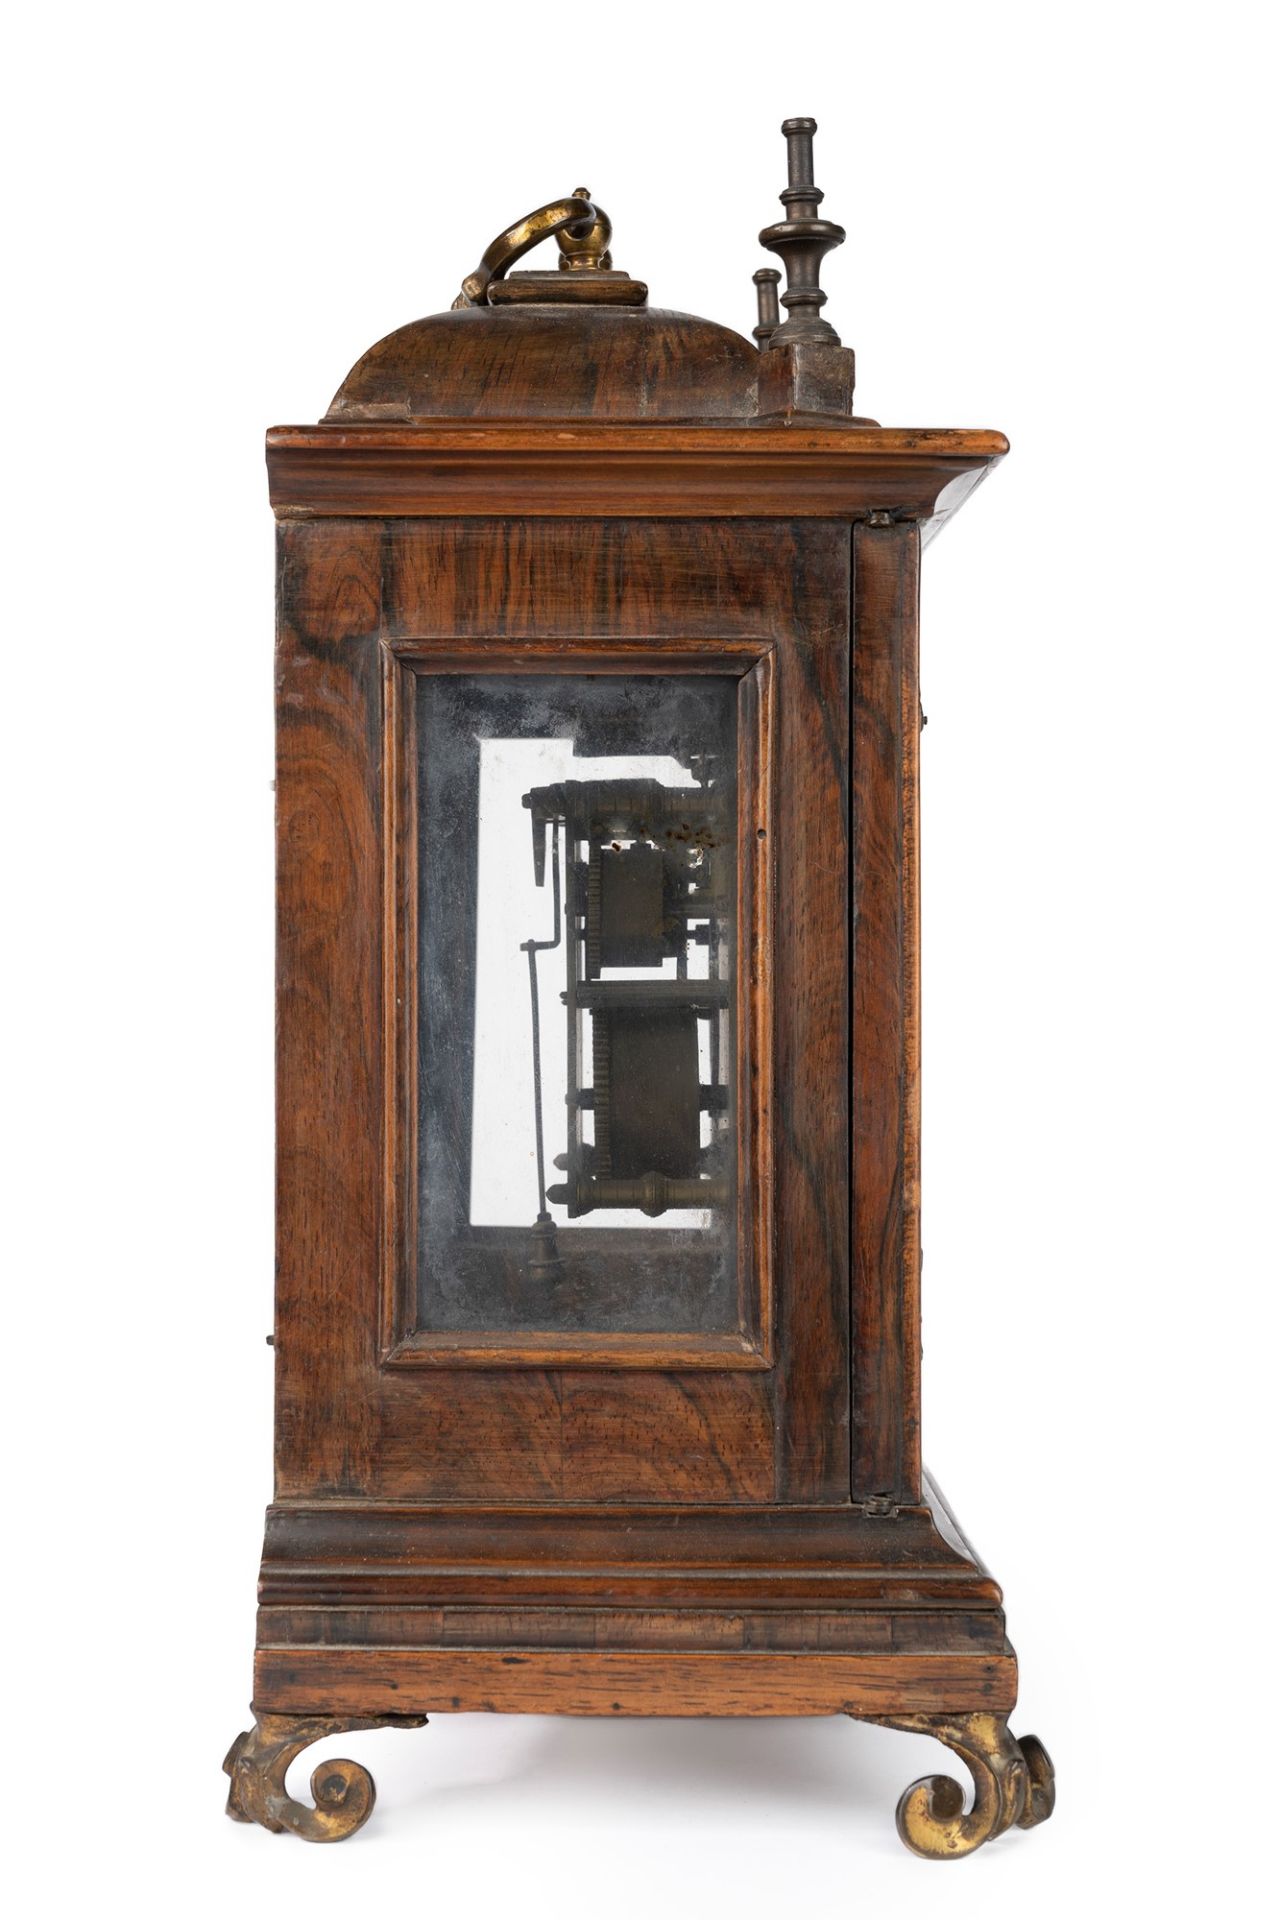 Table clock in wood and bronze, 18th century - Image 6 of 8